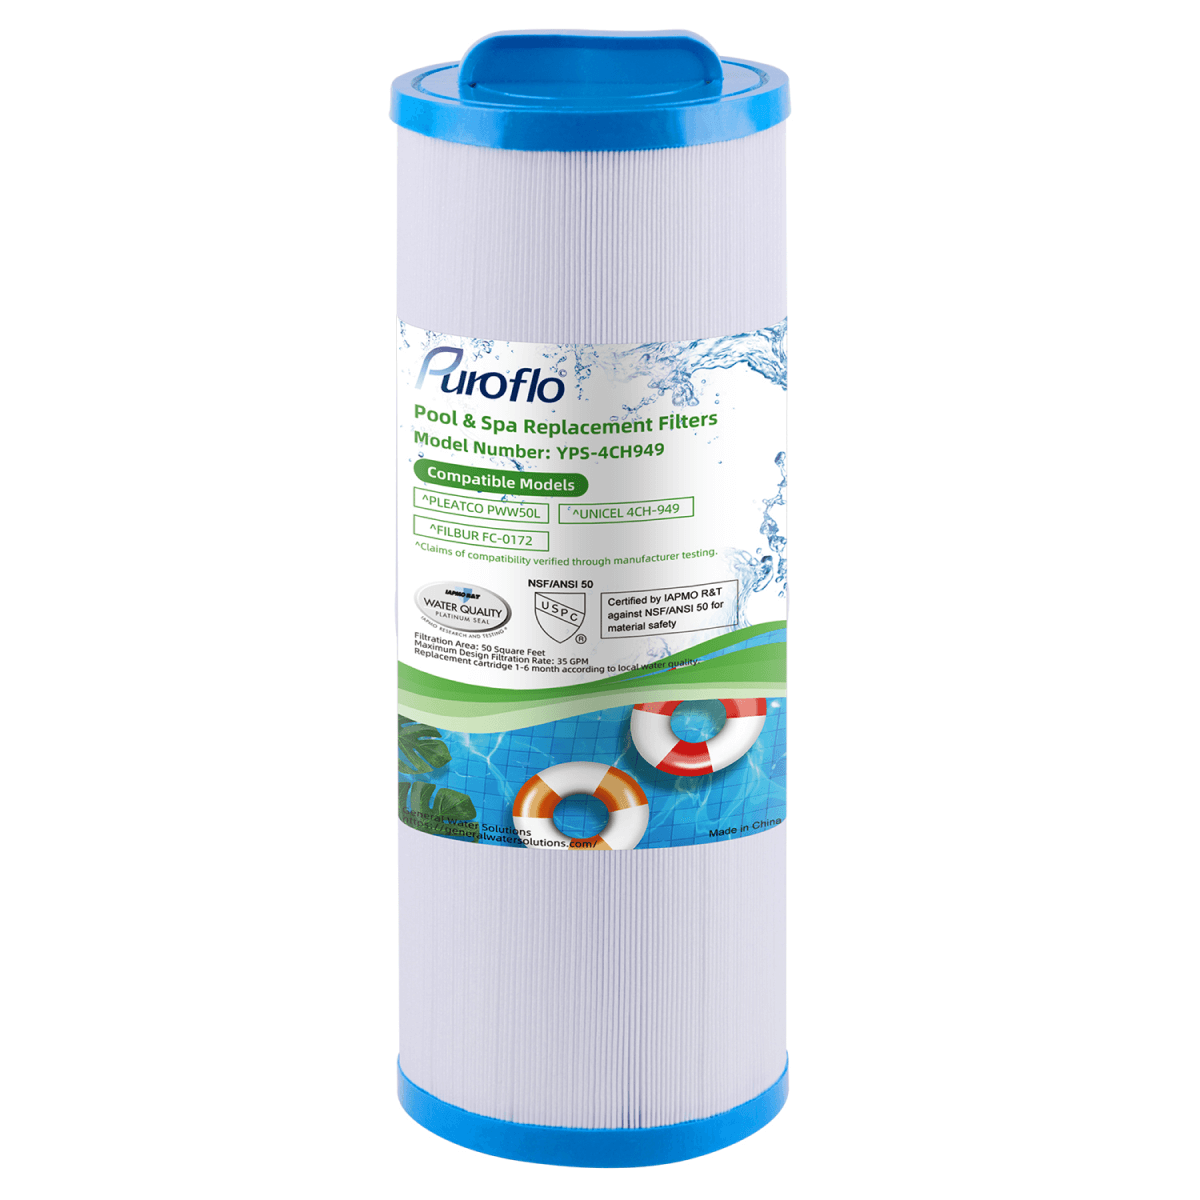 Puroflo Spa Filter Replacement for Pleatco PWW50L, Unicel 4CH-949, Filbur FC-0172 (1 Pack)